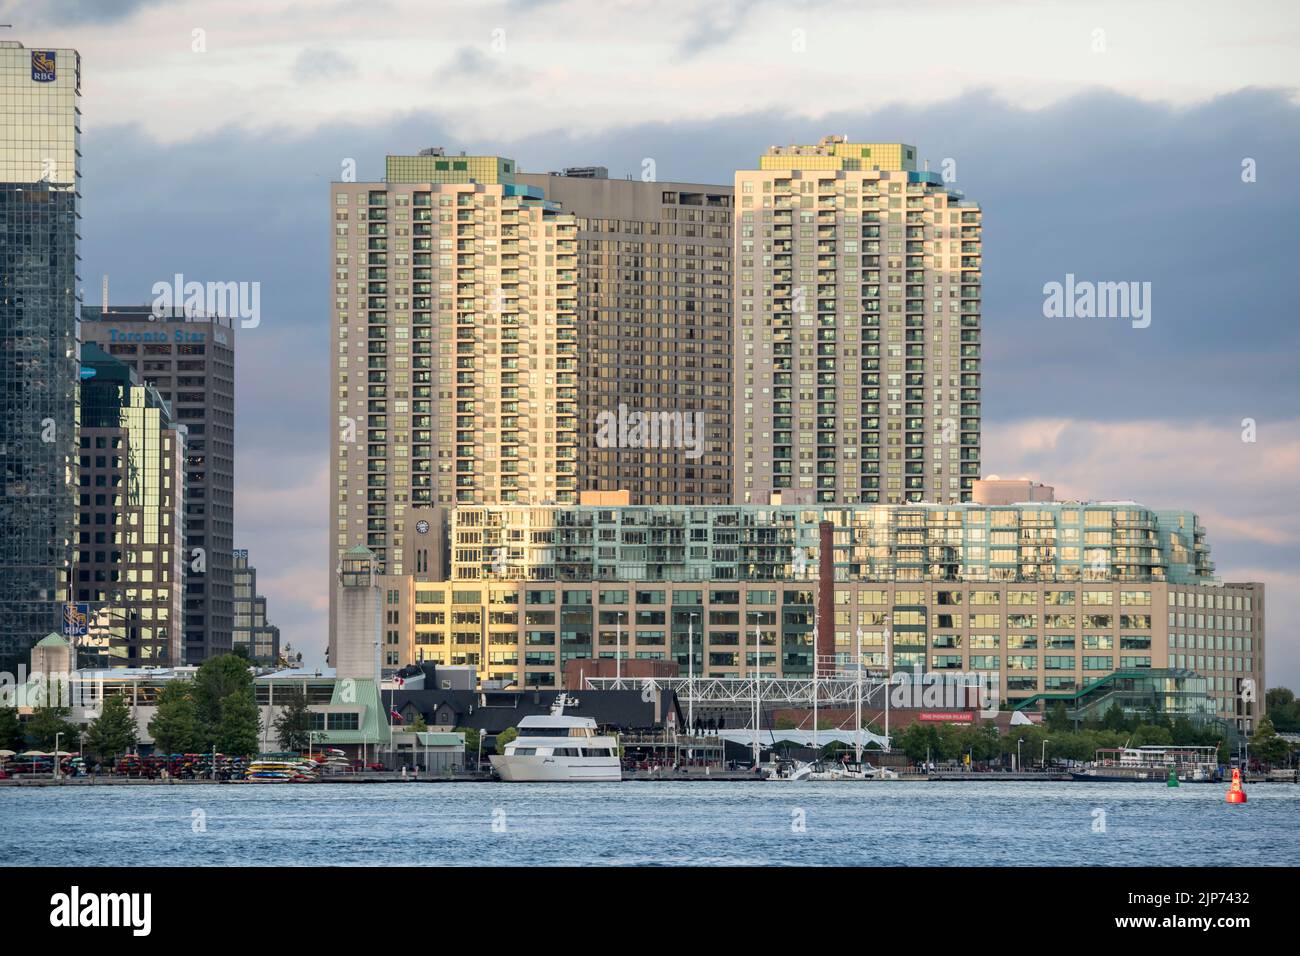 Residential high rise buldings in Toronto downtown Stock Photo